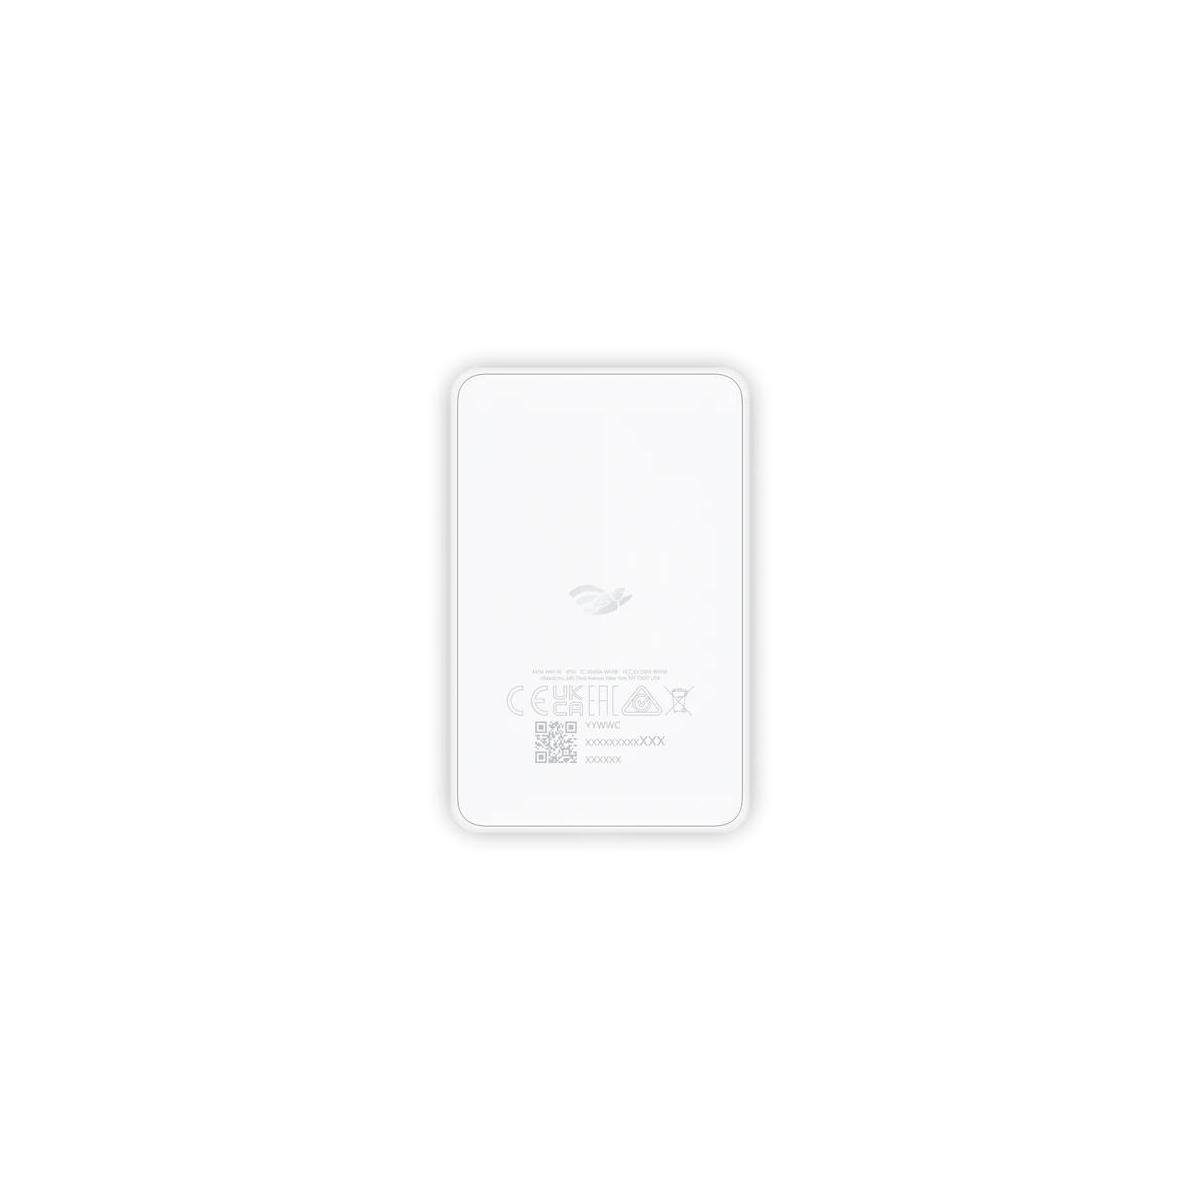 Ubiquiti WiFiMan-Assistent Networks WLAN-Antenne